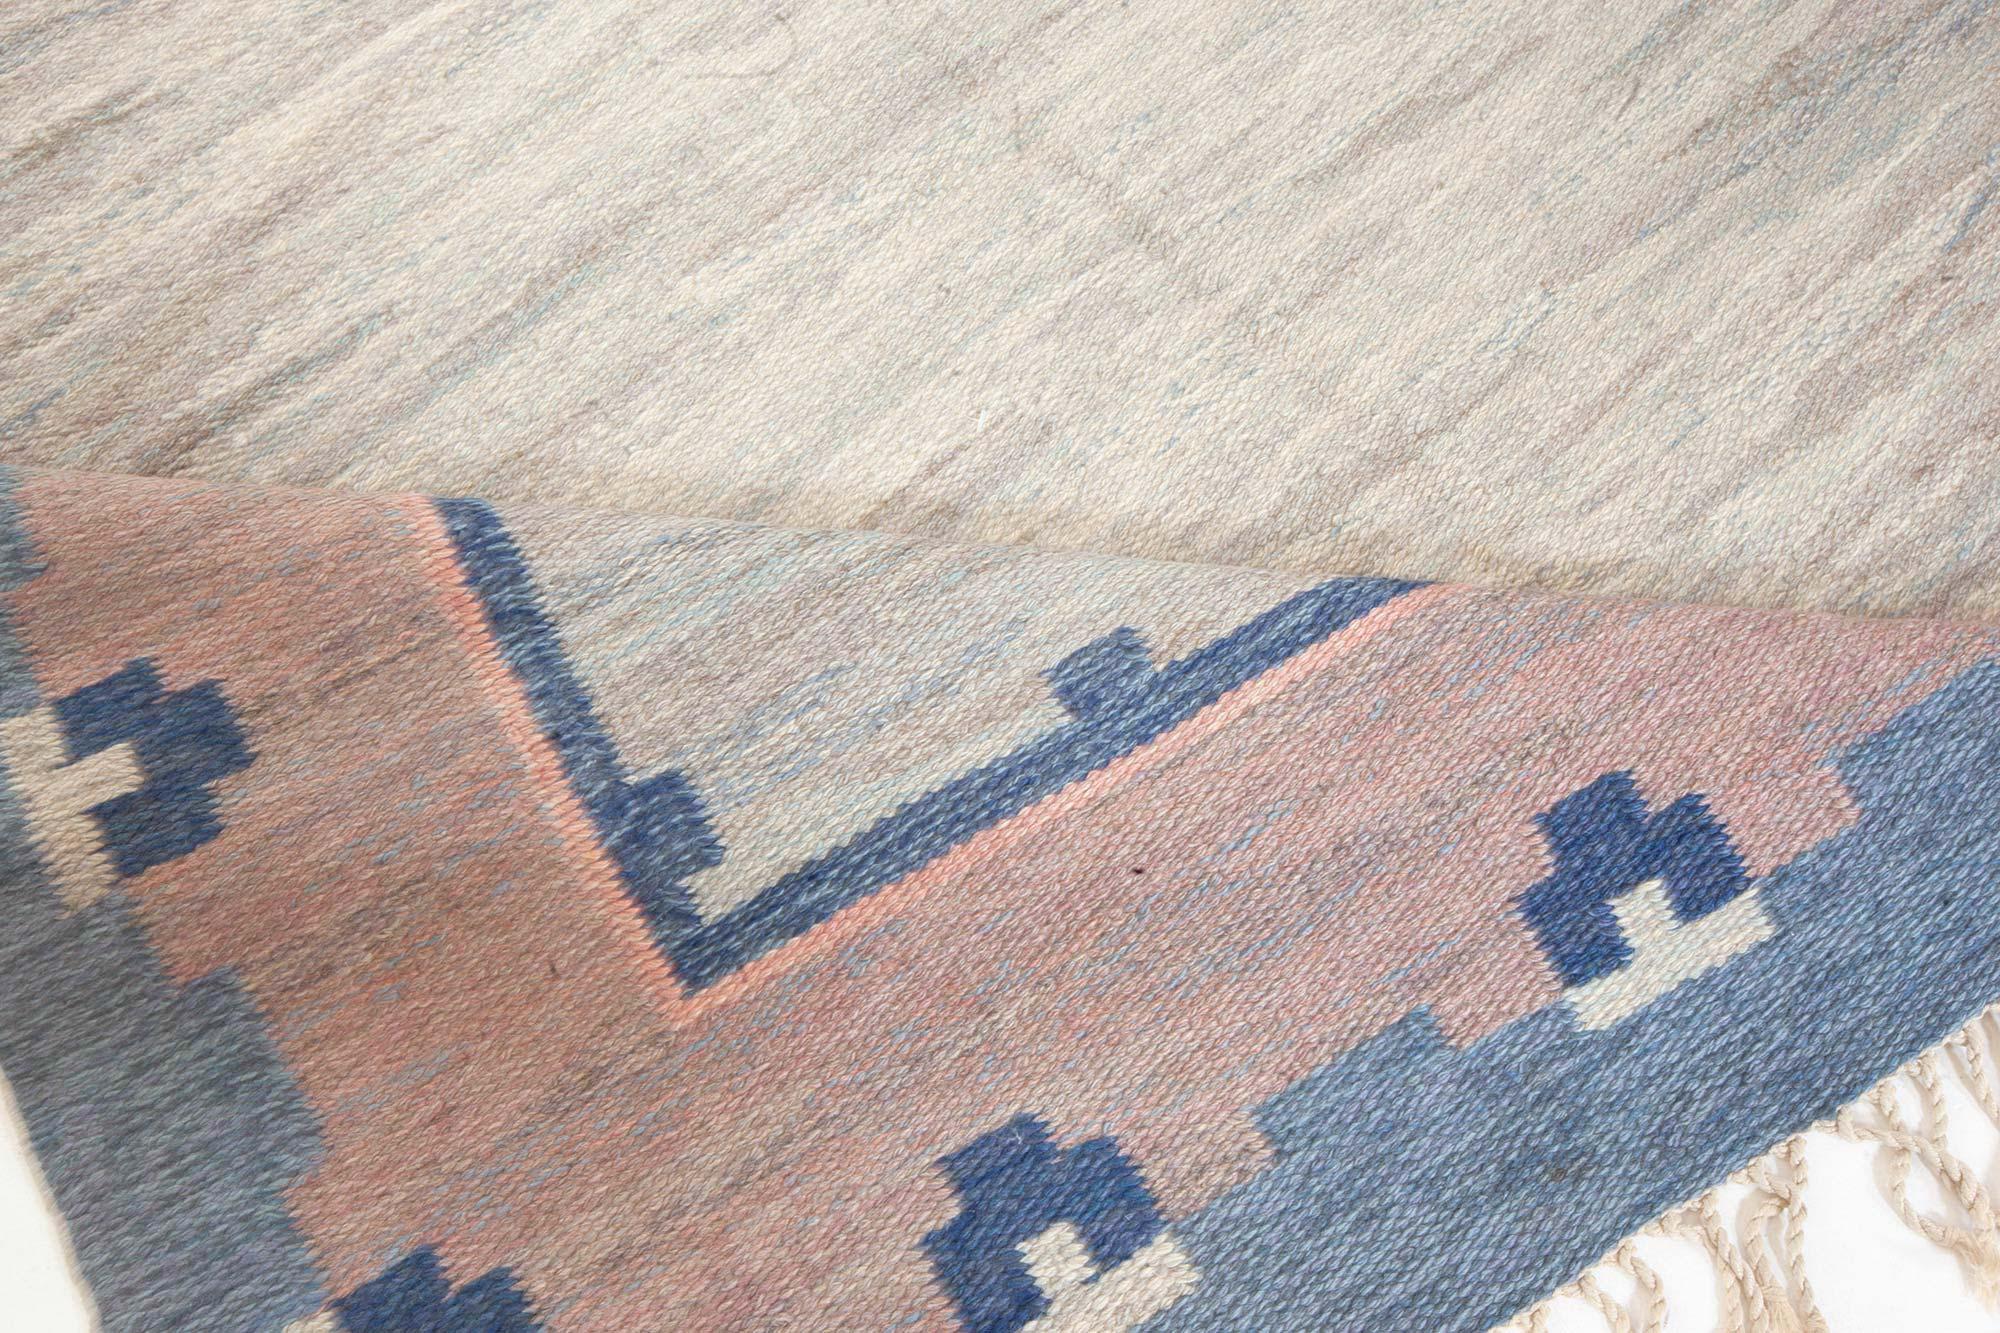 Midcentury Swedish light gray, blue and pink handwoven wool rug by 'ABJ'
Size: 5'3